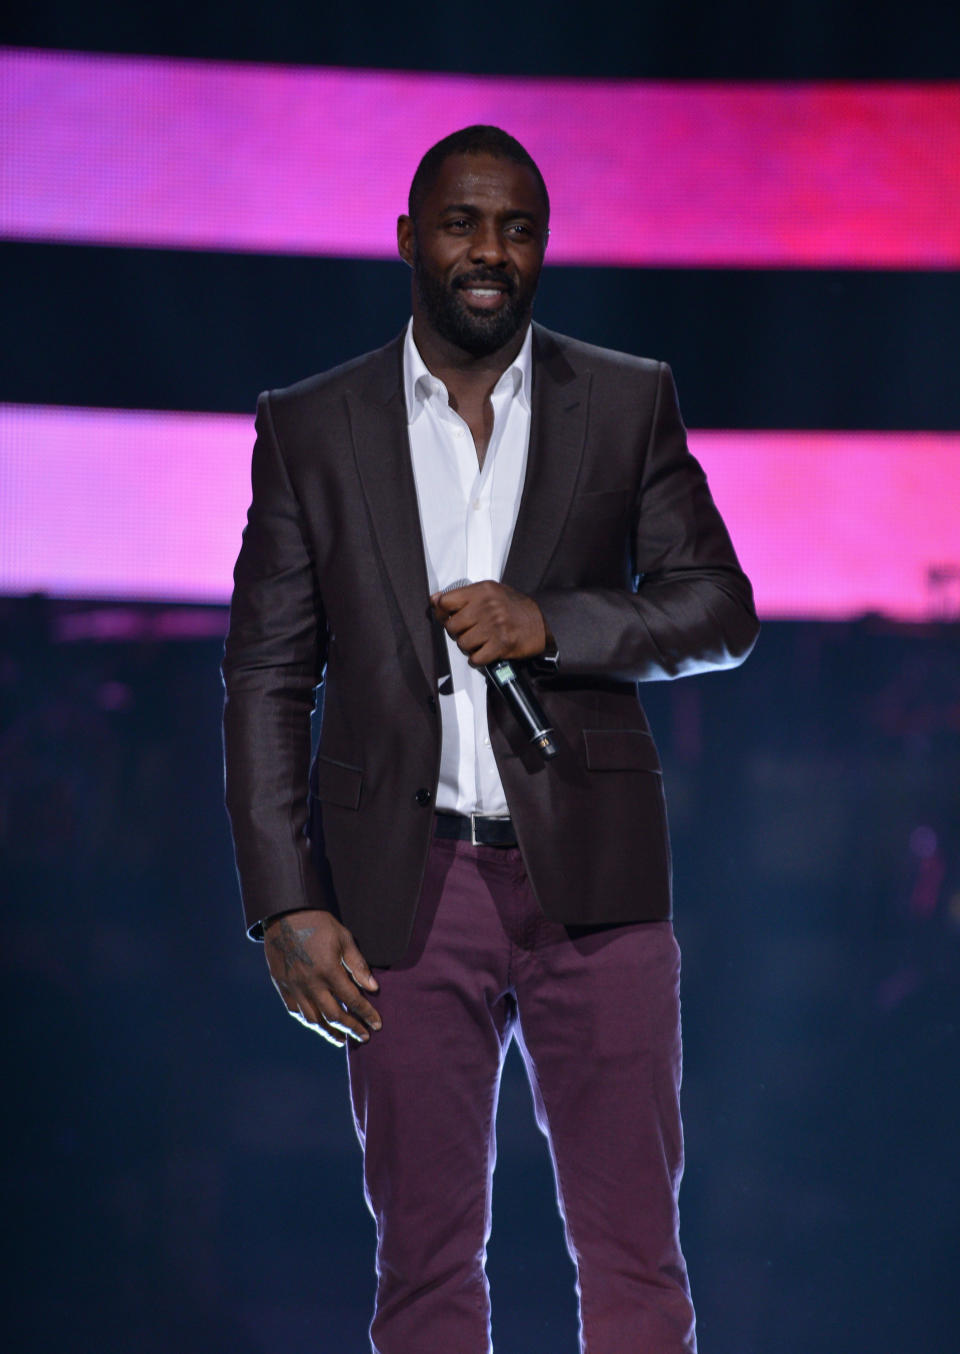 NEW YORK, NY - OCTOBER 13:  Actor Idris Elba speaks onstage at BET's Black Girls Rock 2012 at Paradise Theater on October 13, 2012 in New York City.  (Photo by Bryan Bedder/Getty Images for BET)